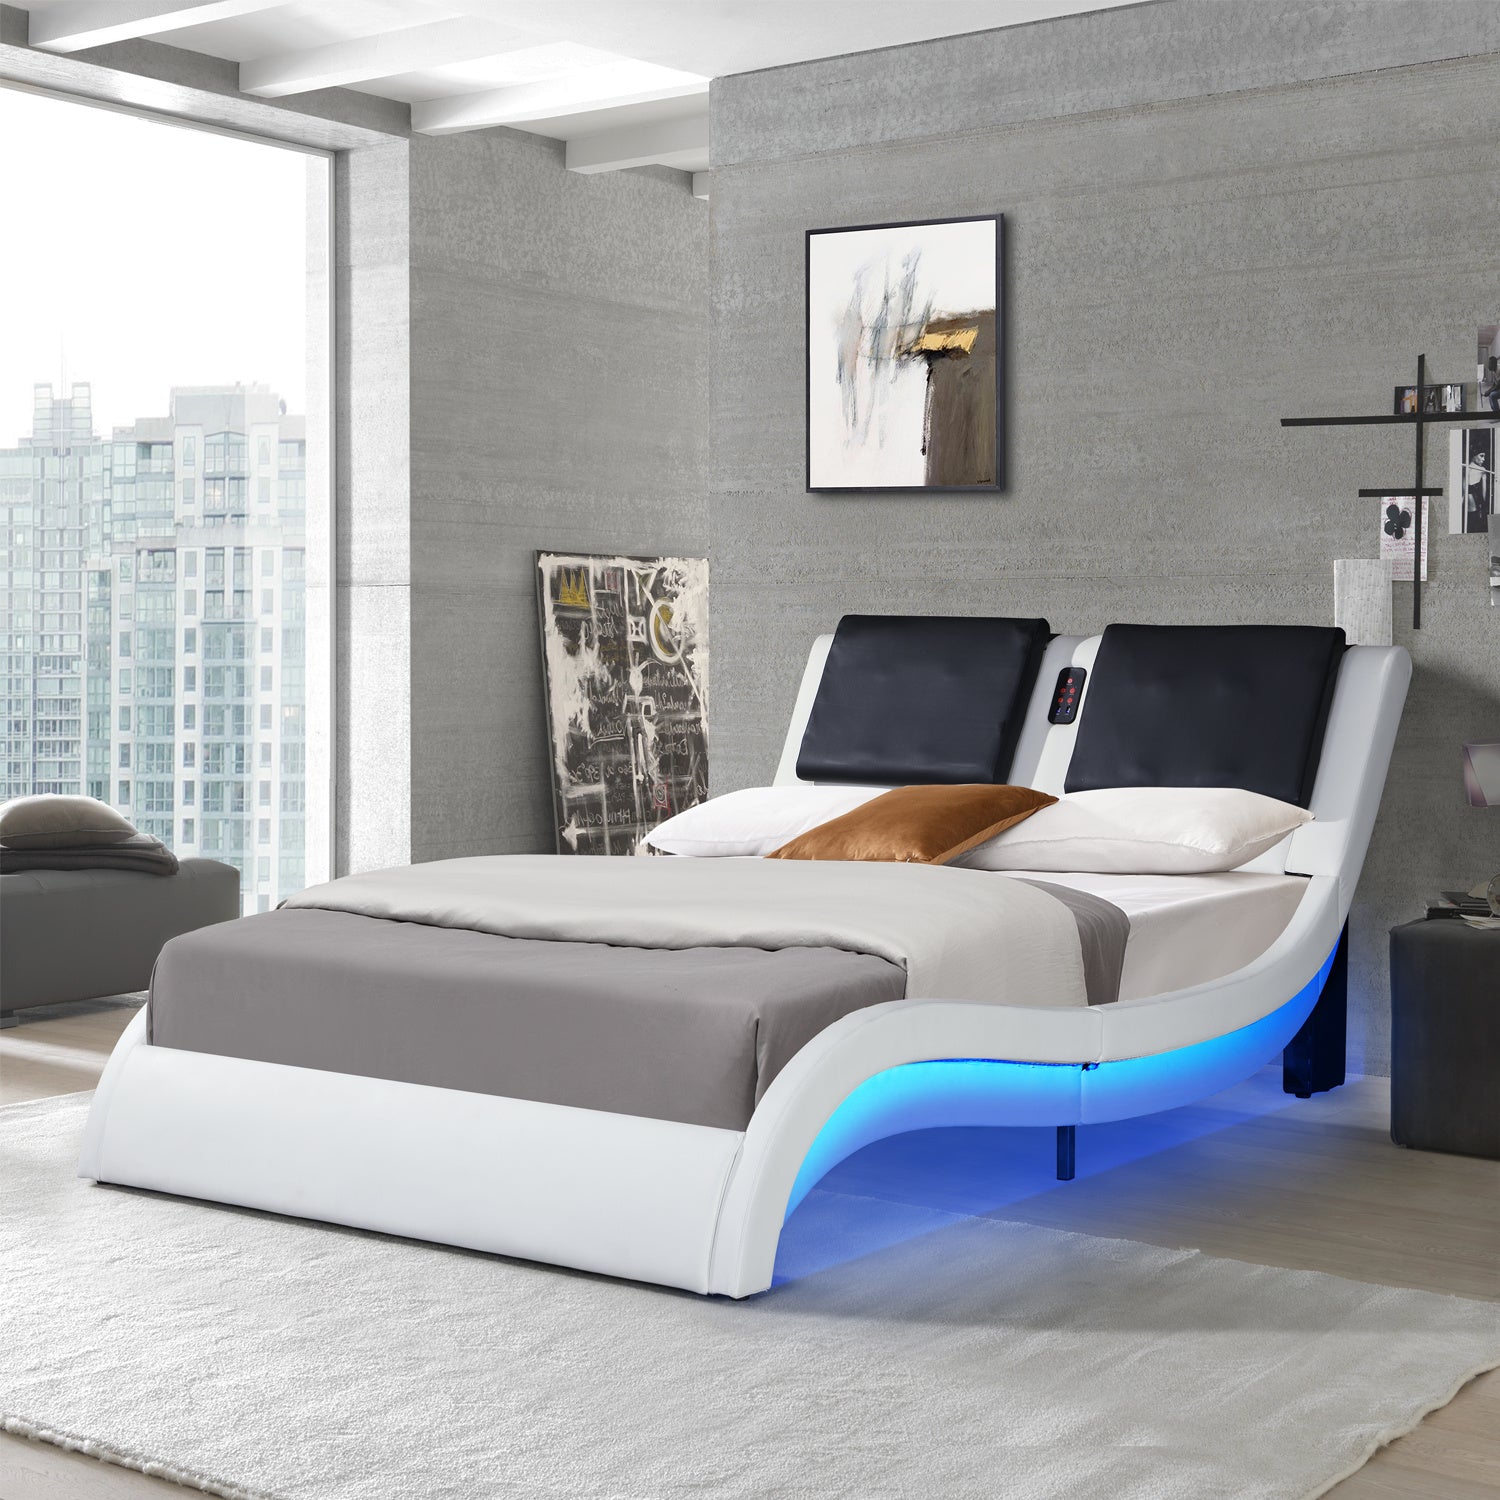 Faux Leather Upholstered Platform Bed Frame with led lighting; Bluetooth connection to play music  RGB control; Backrest vibration massage; Queen